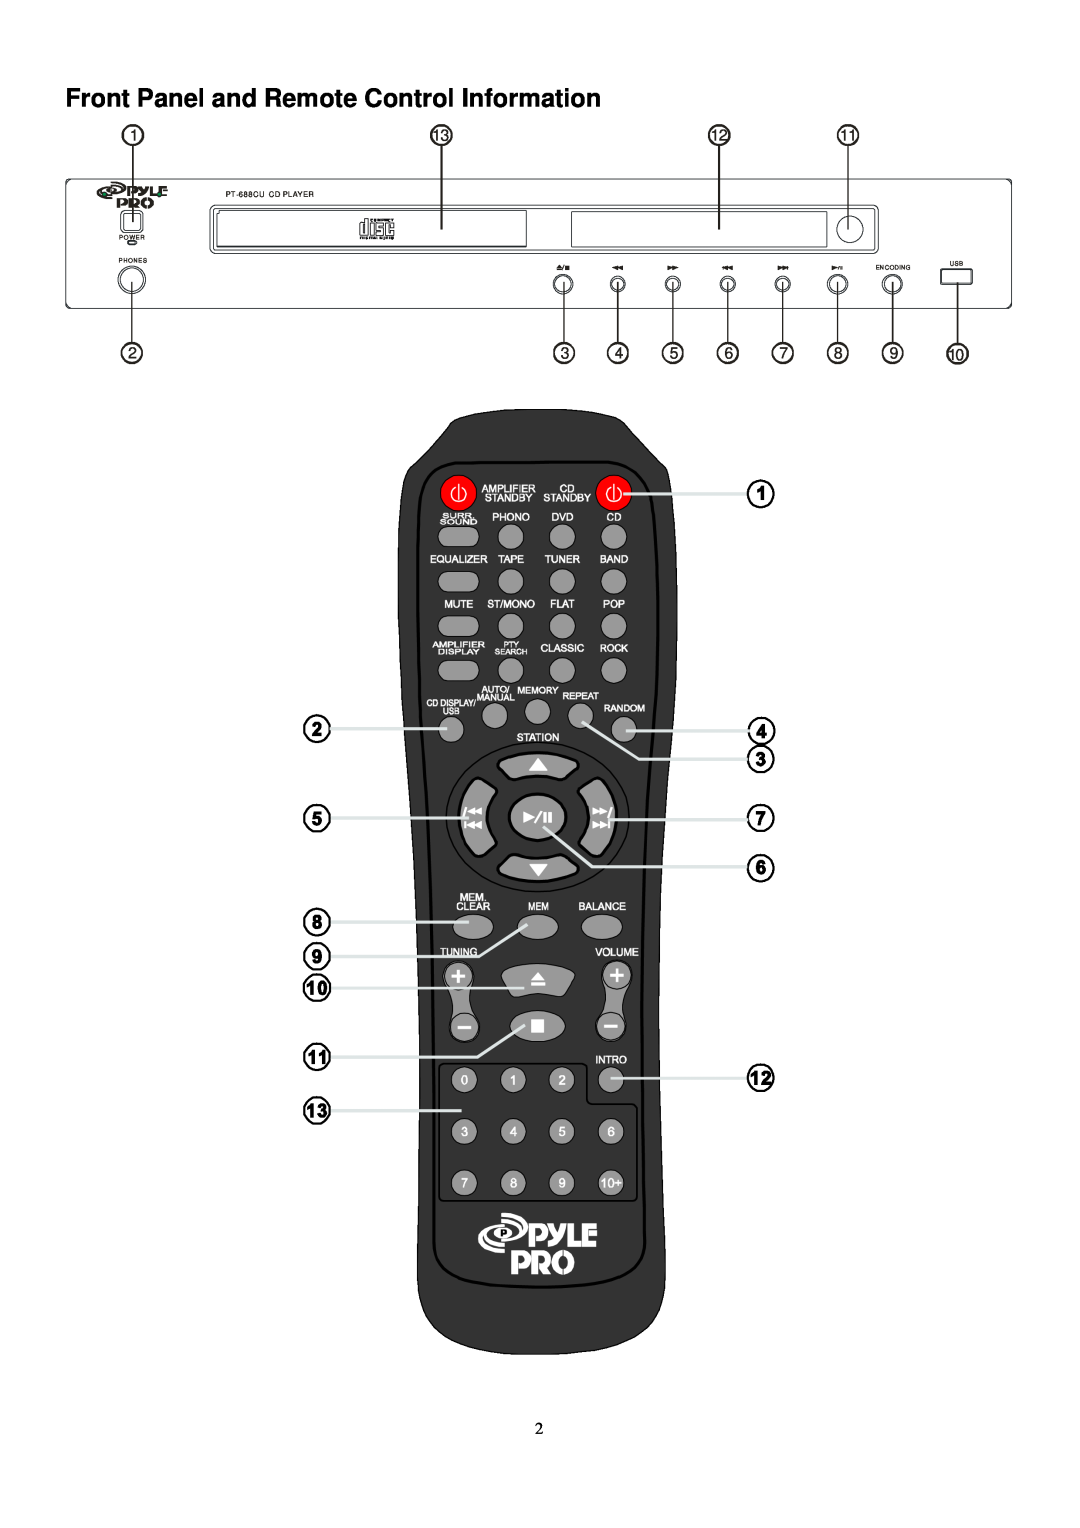 PYLE Audio PT-688CU manual Front Panel and Remote Control Information, 1131211, PT -688CUCD PLAYER, Power, Phones, Encoding 